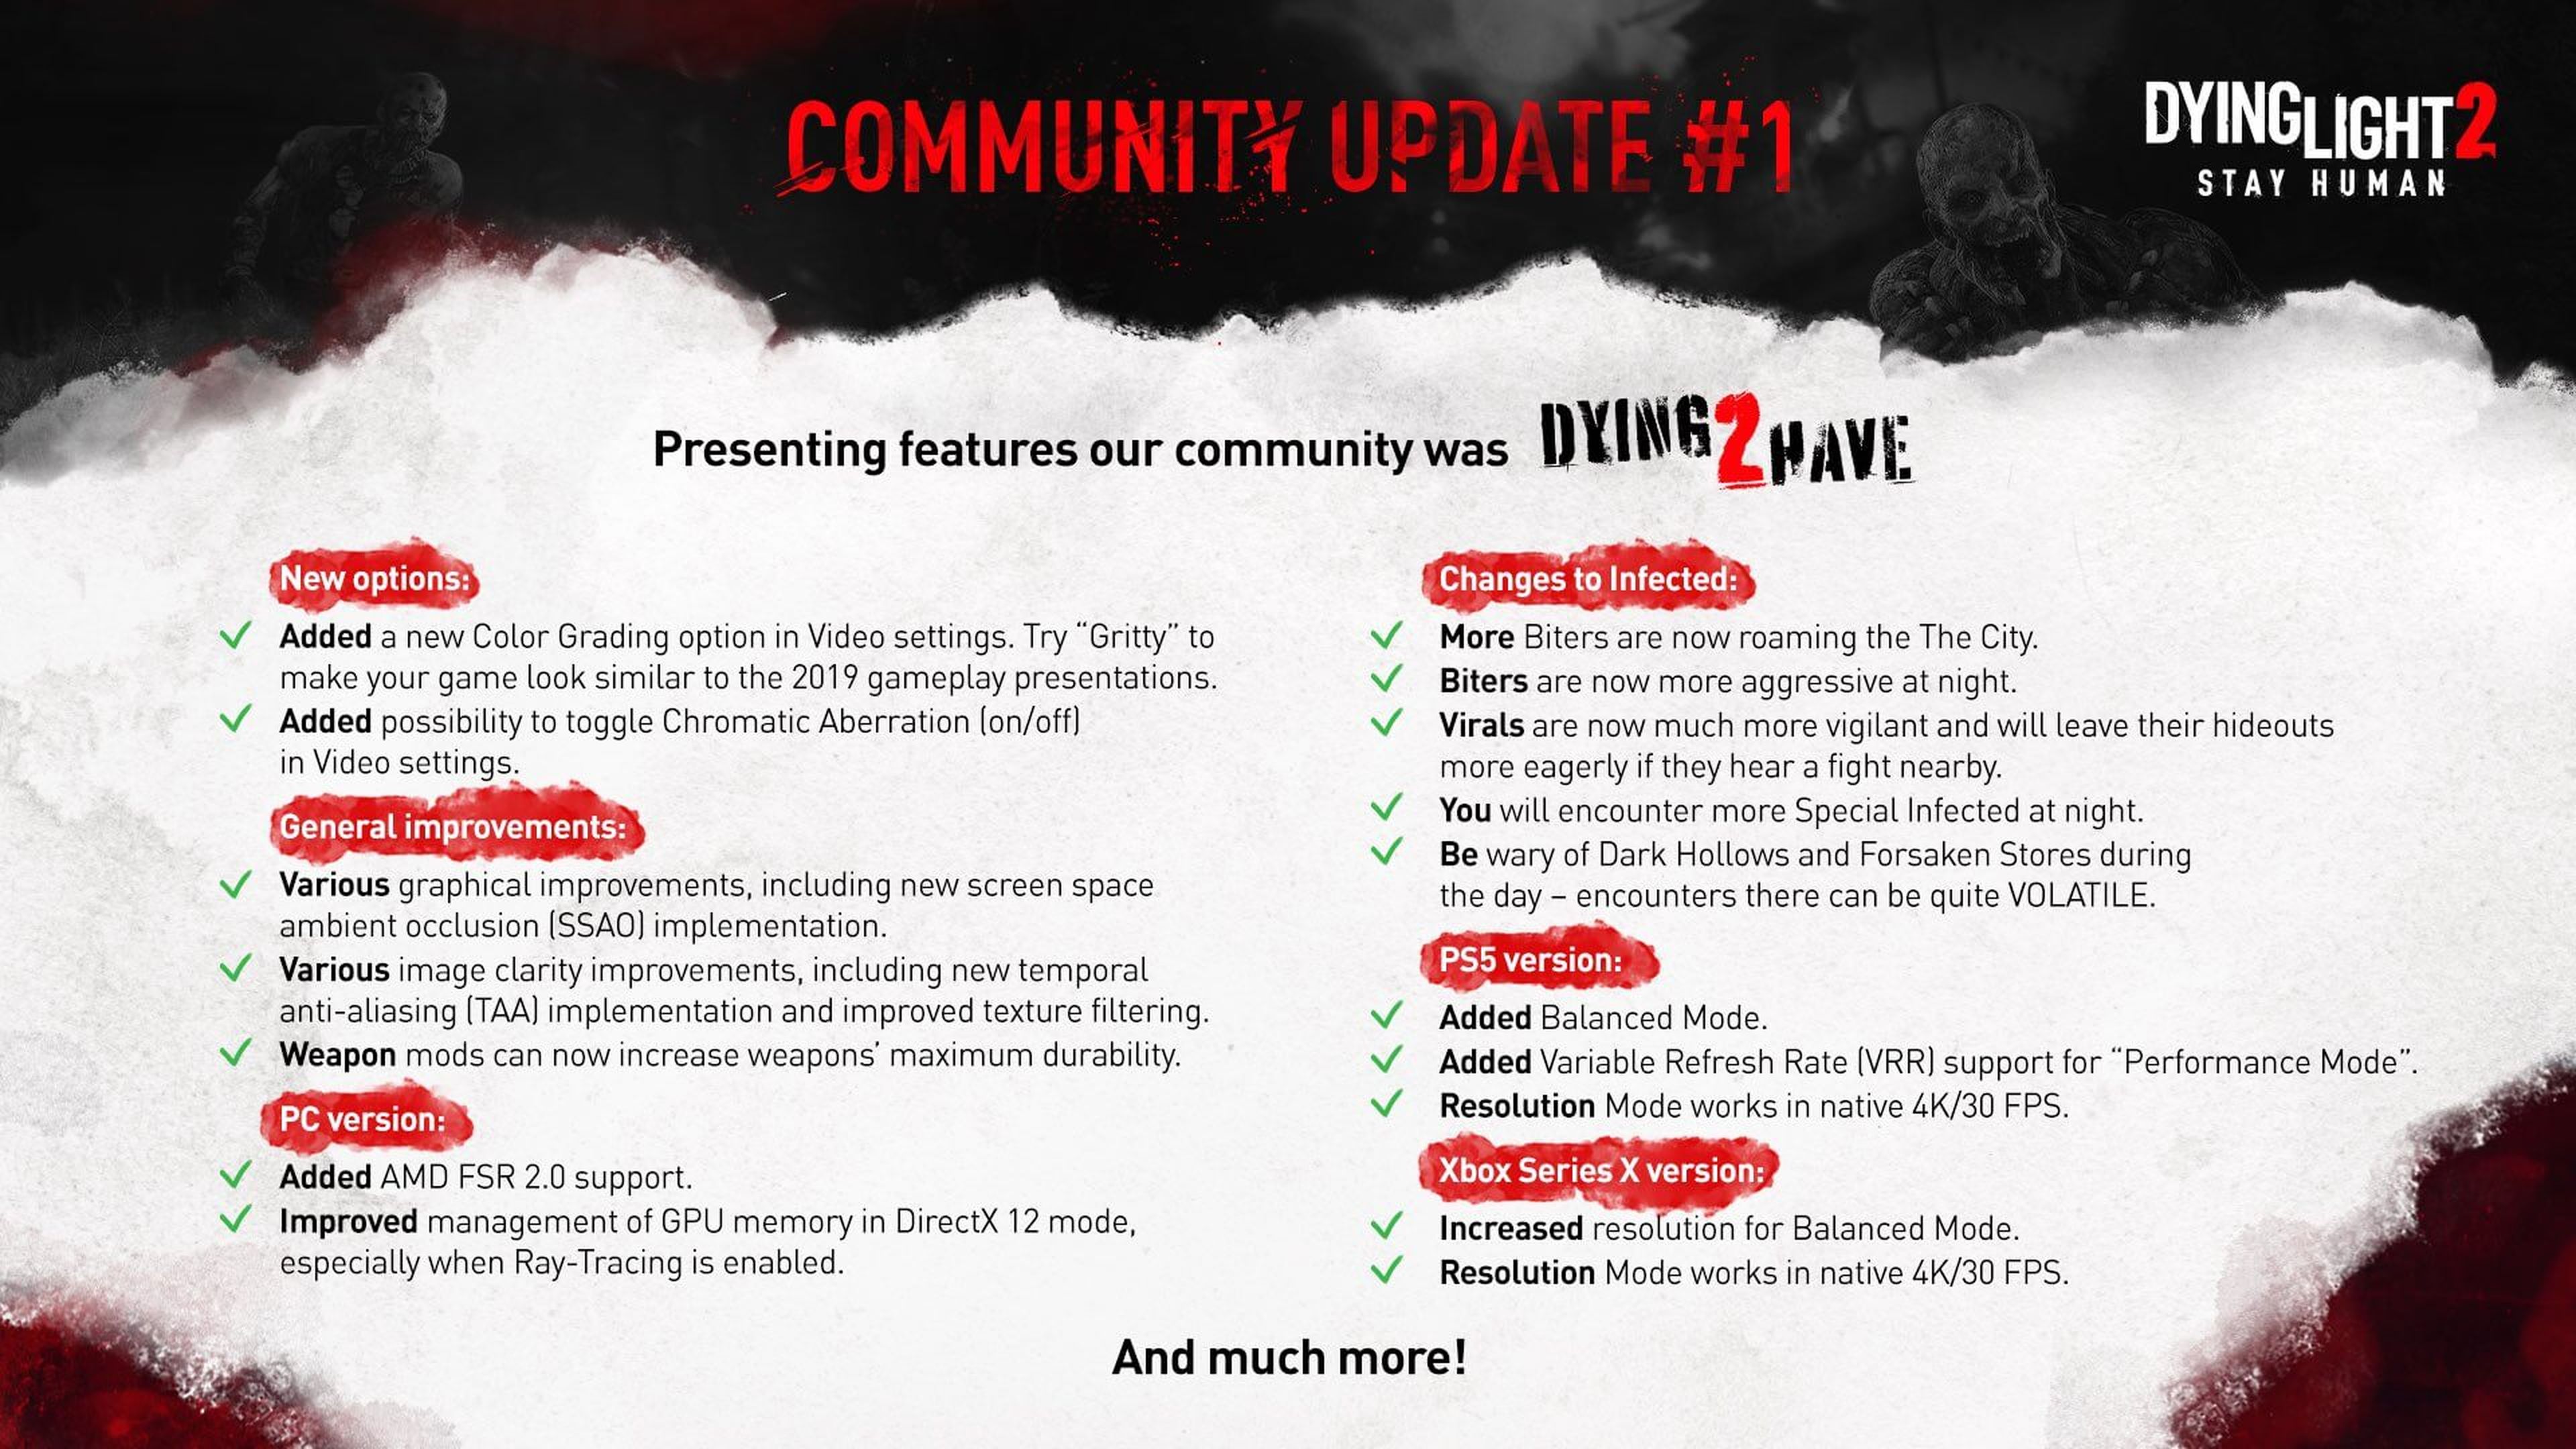 Dying Light 2 Community Patch #1